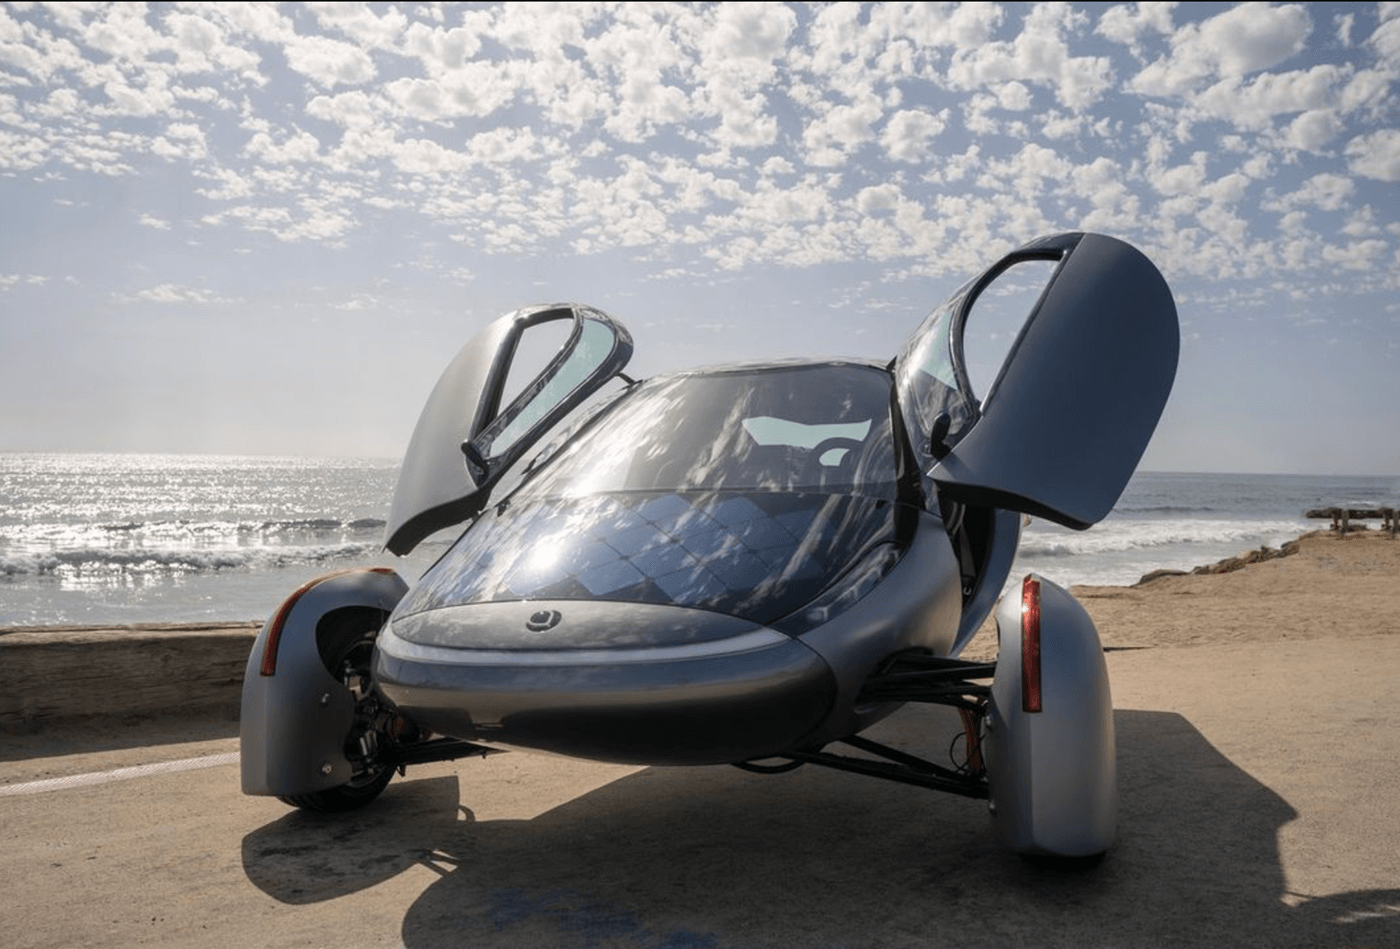 Aptera weighs 65% less than other EVs